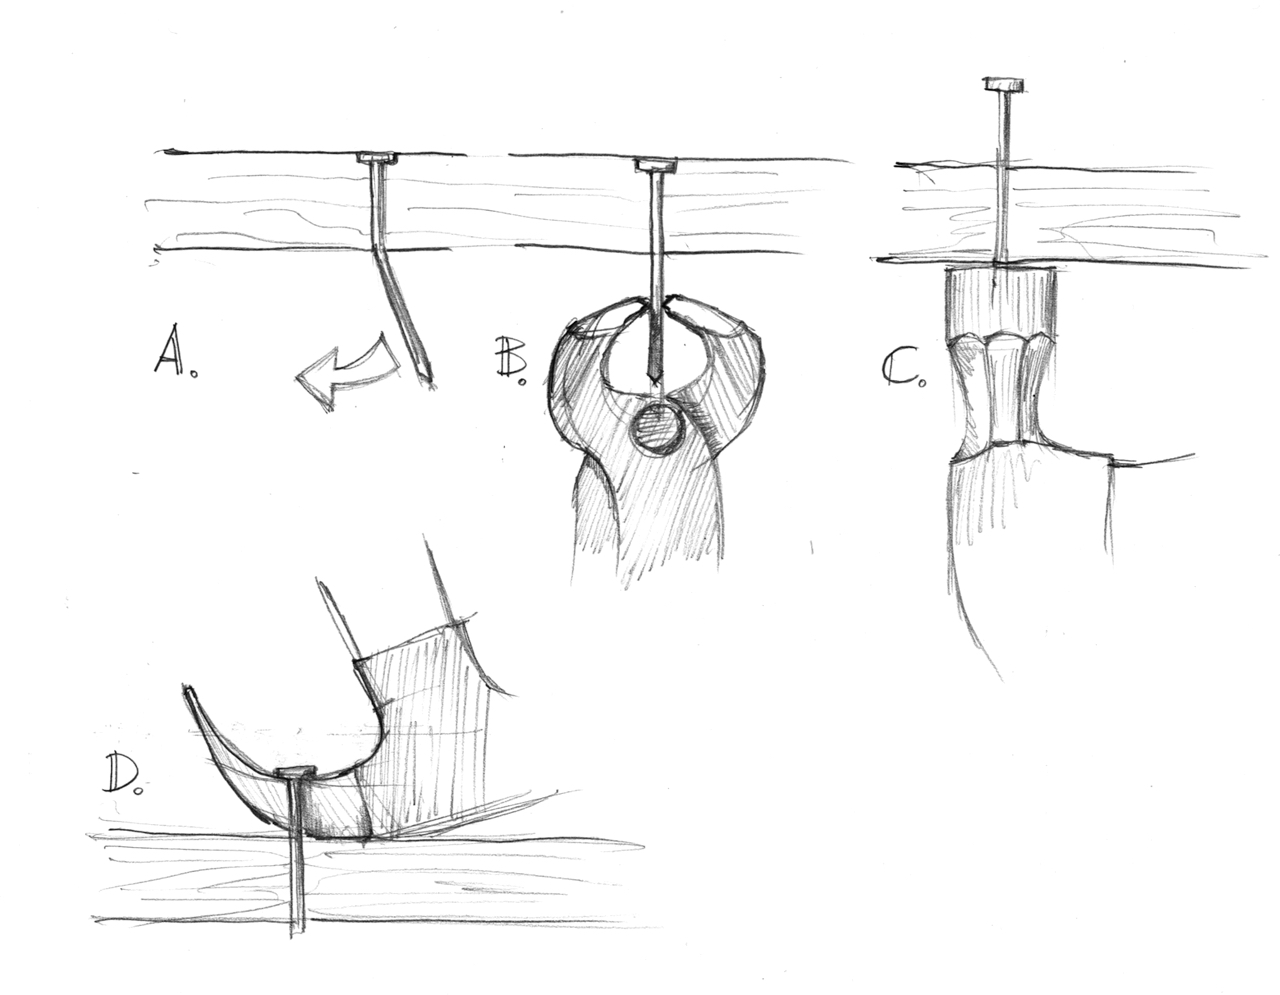 An illustration showing how to extract nails from a board.